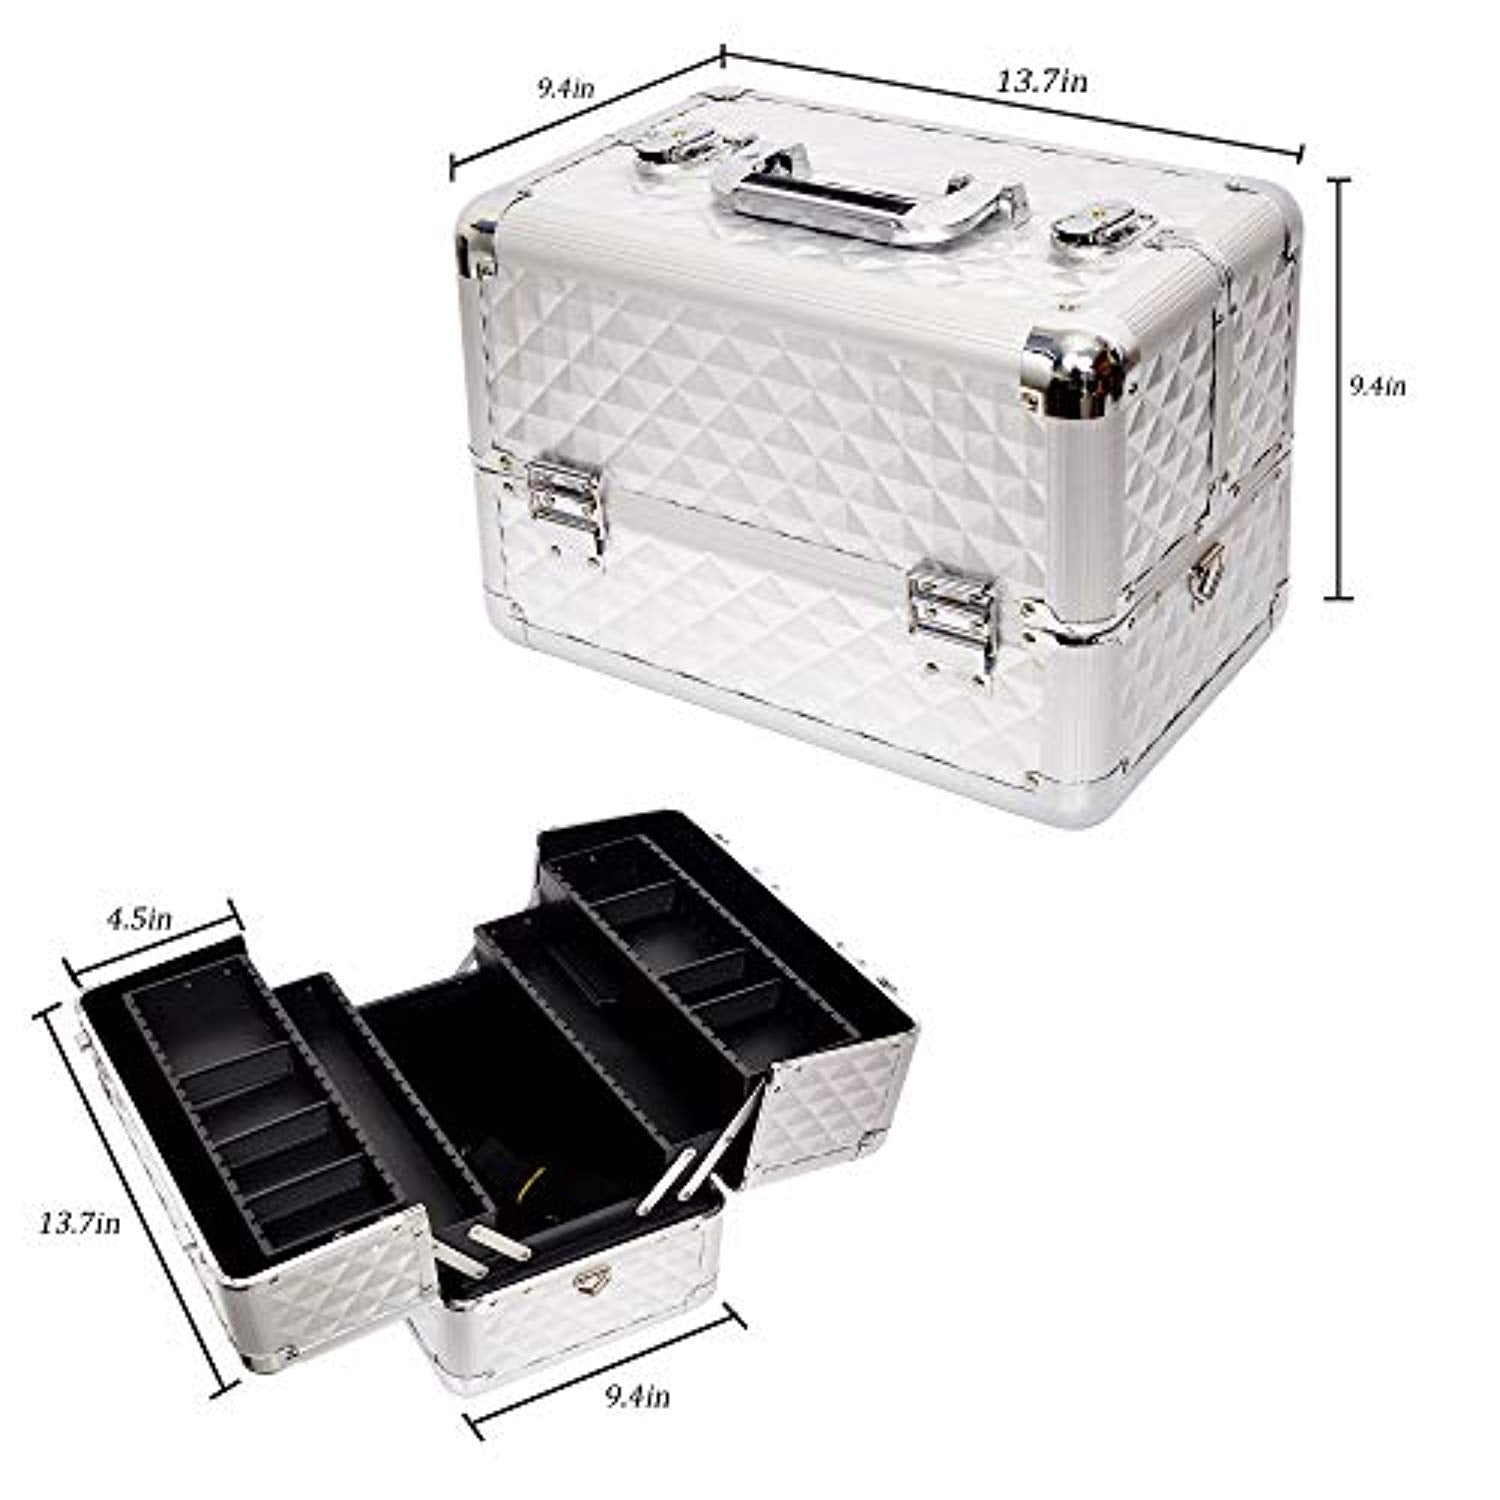 Bosonshop Professional Makeup Train Case with 4 Sliding Trays and Adjustable Dividers with 2 Lock&Keys,Silver